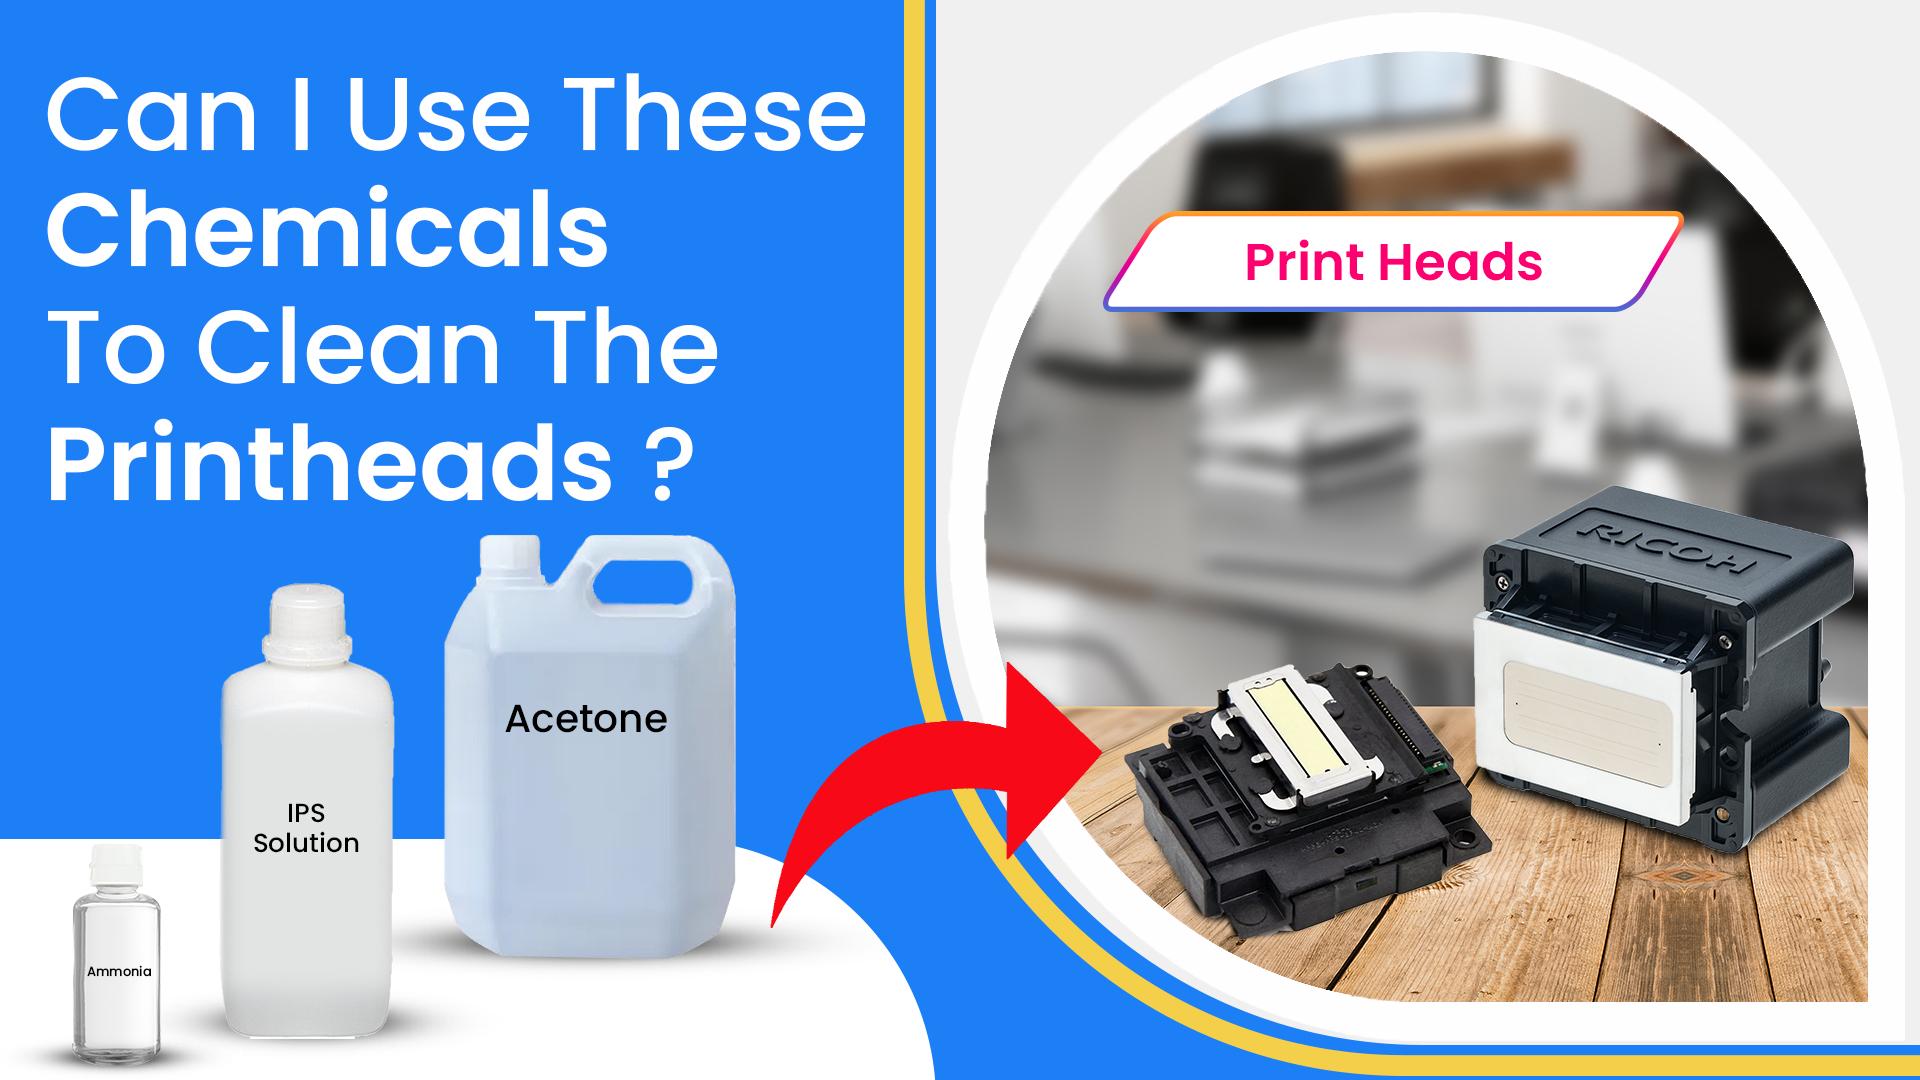 What is the best material for inkjet printhead cleaning?